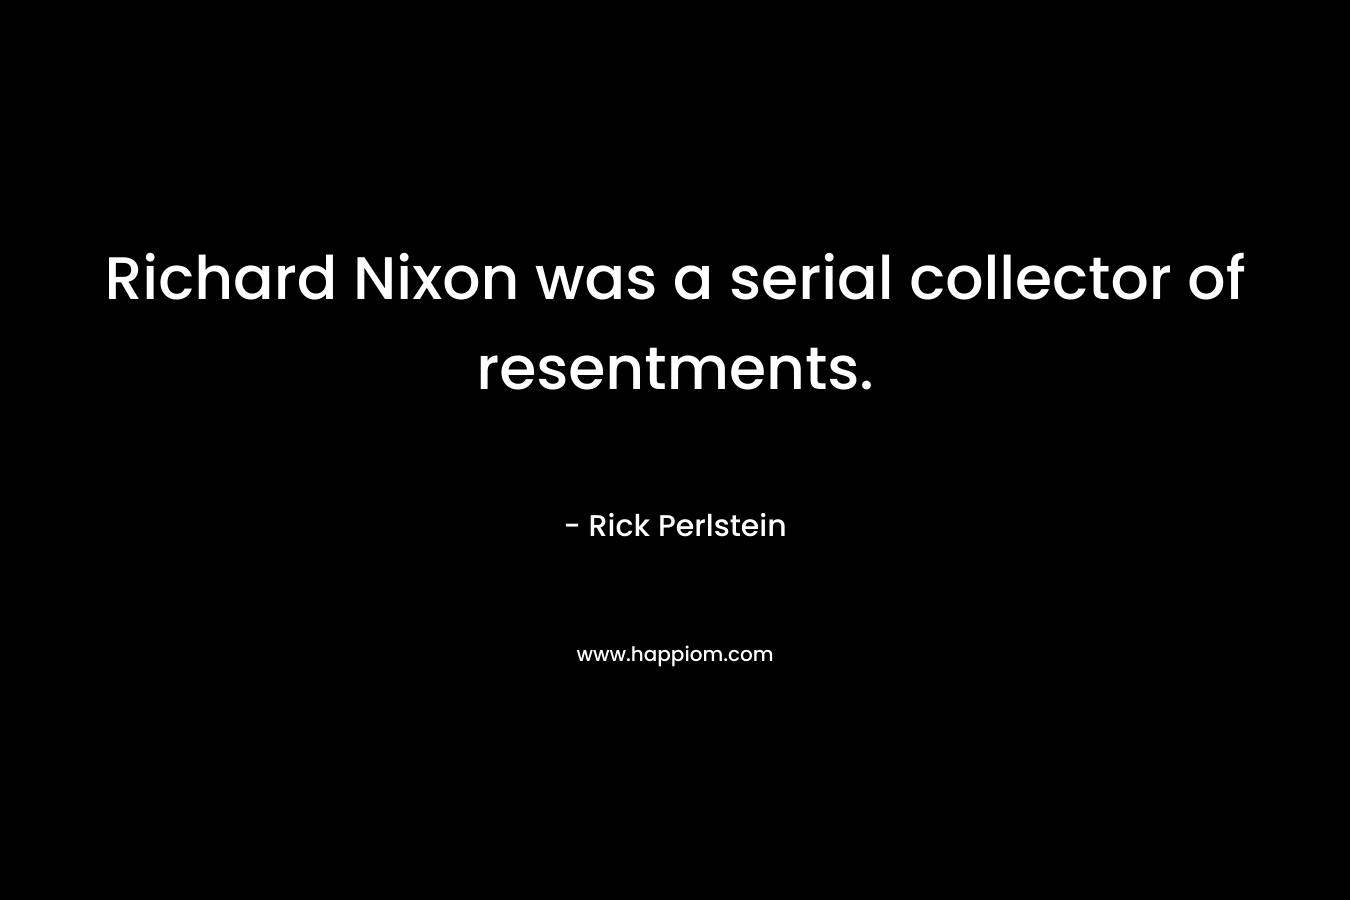 Richard Nixon was a serial collector of resentments.